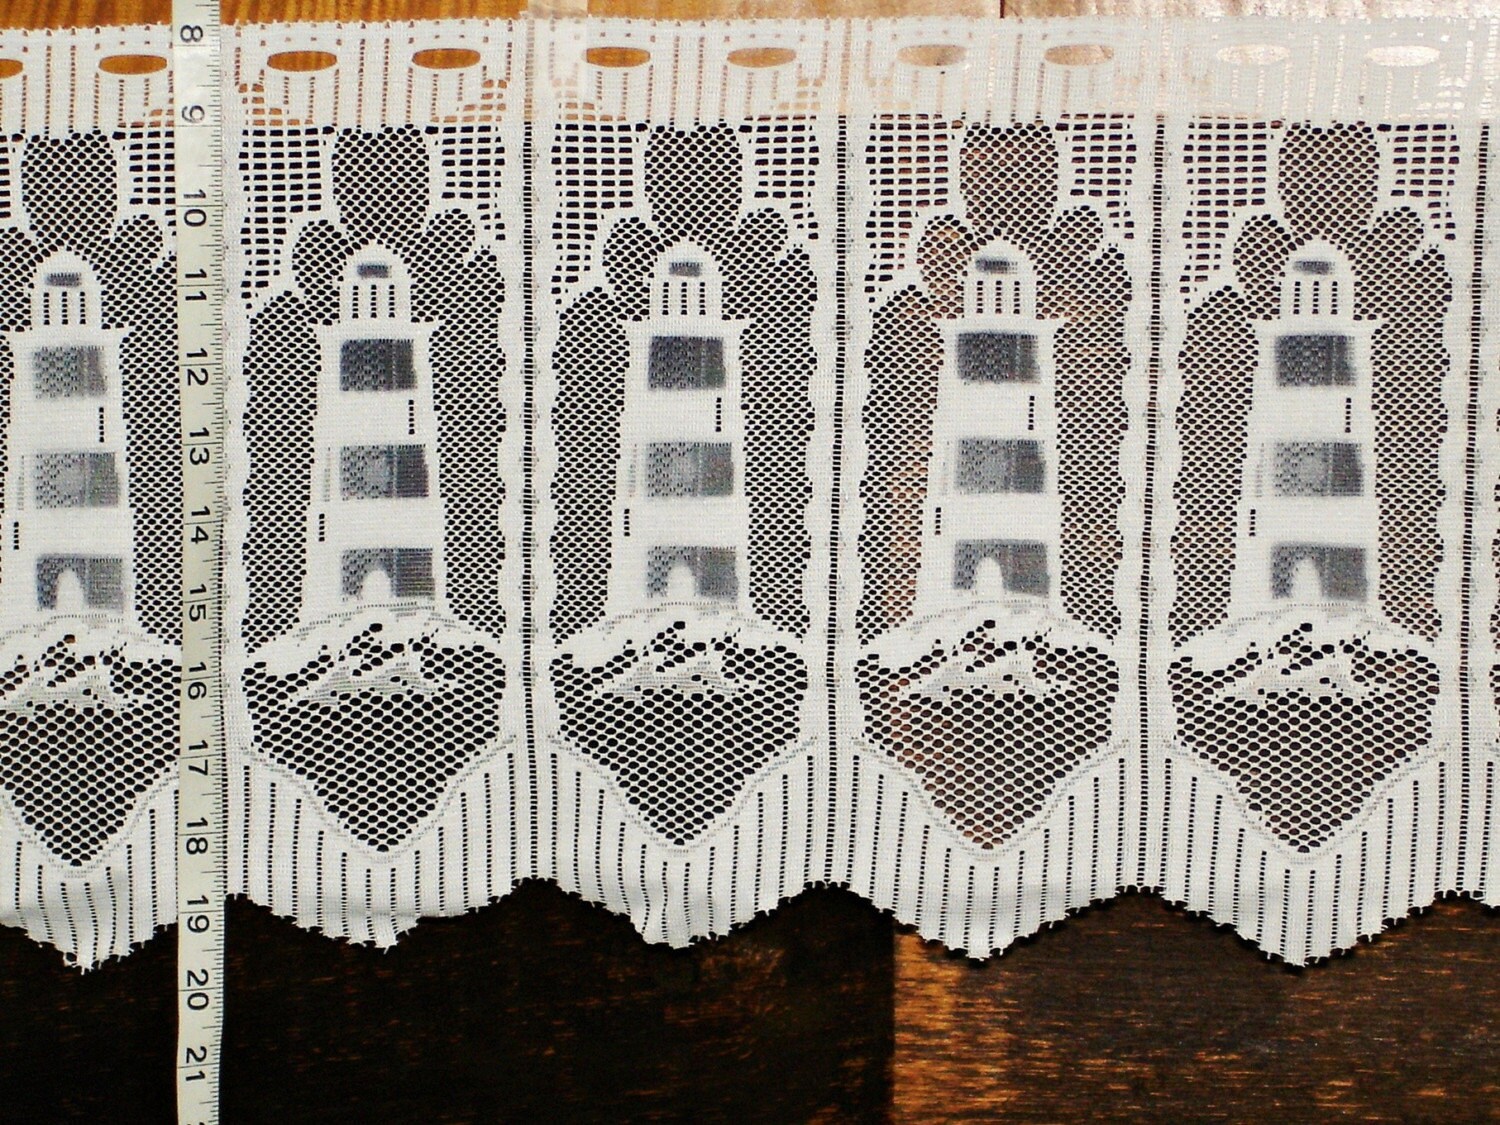 QUOT;LIGHTHOUSE LACE FABRIC CAFE CURTAIN 12QUOT;QUOT;QUOT; FROM BRICK HOUSE FABRIC